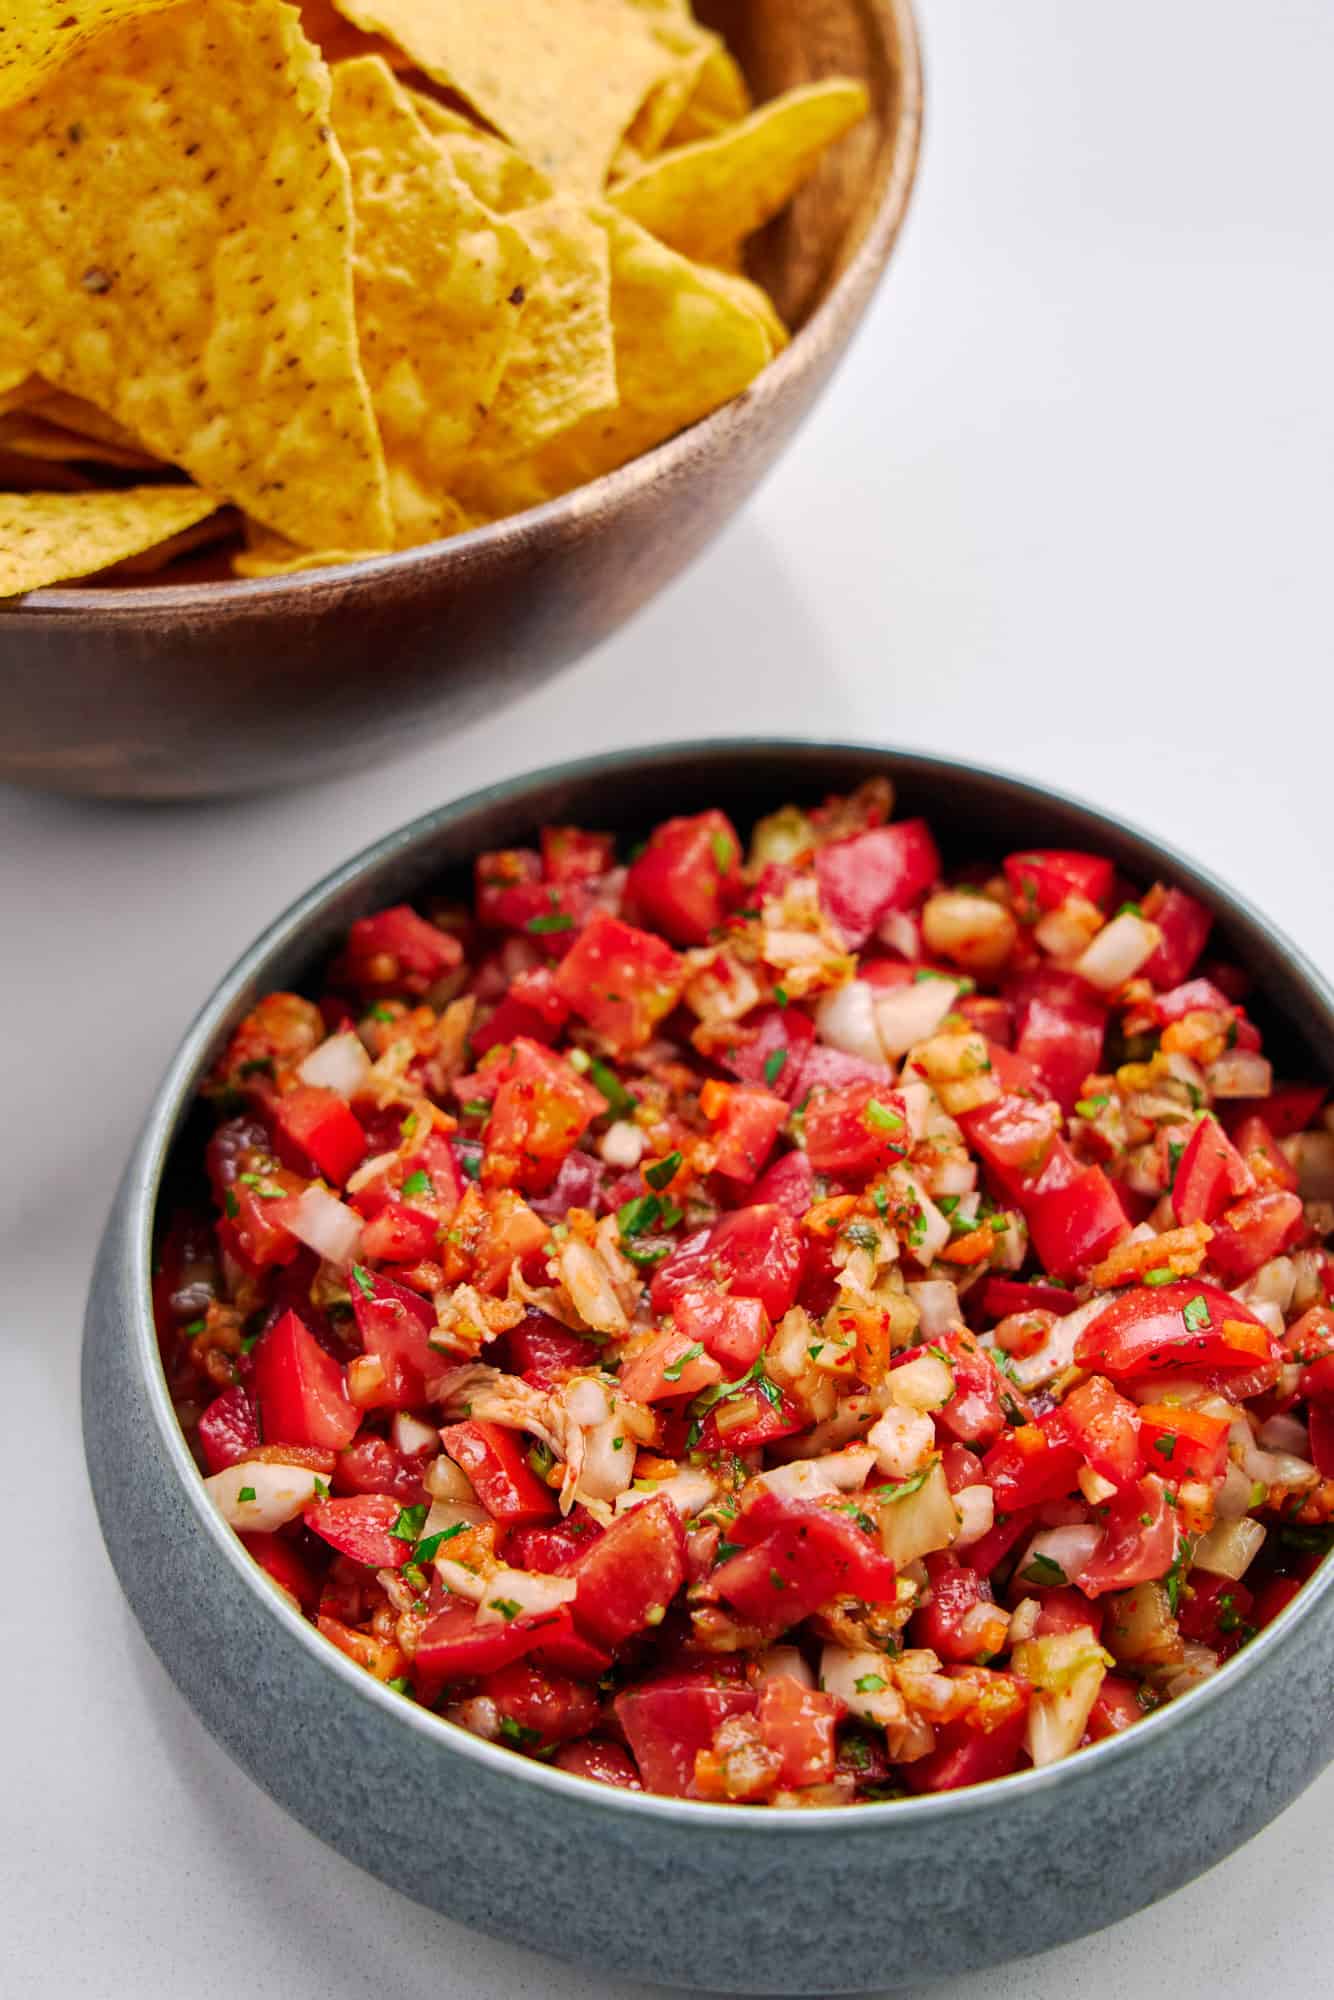 Vibrant and flavorful, a little kimchi takes this tomato salsa to the next level.